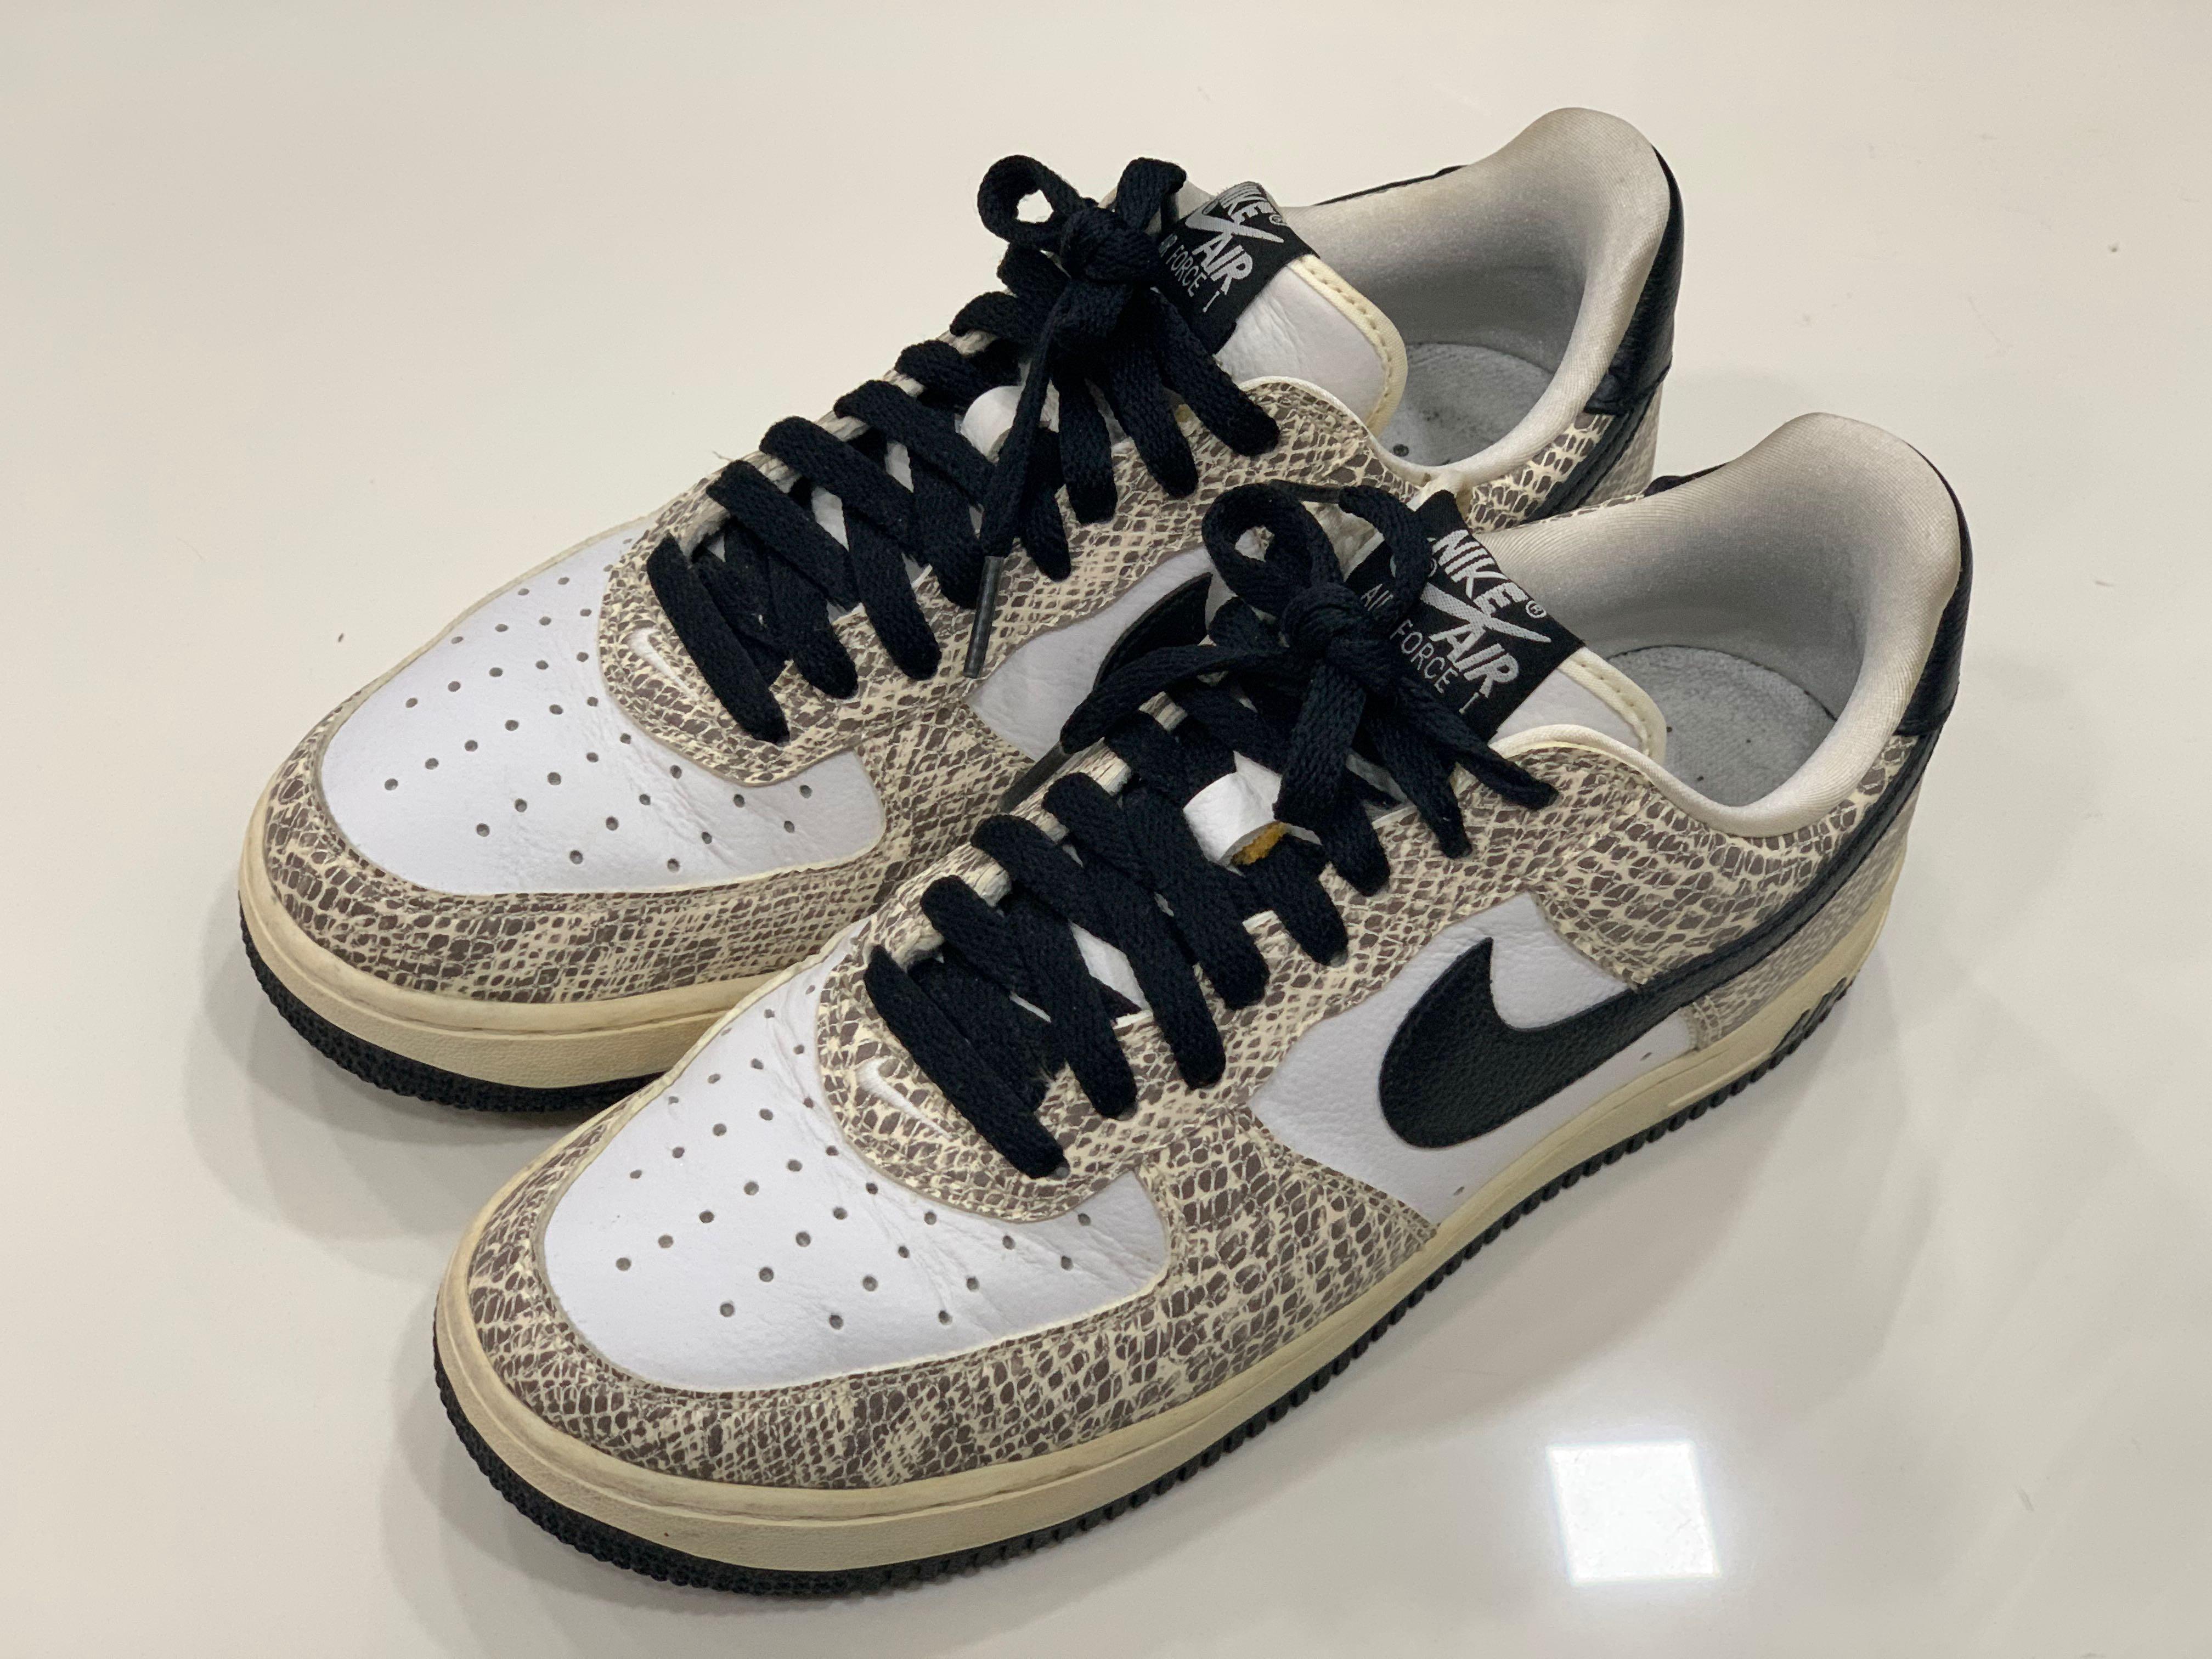 Nike Air Force one low cocoa snake retro (2018) size us 7.5